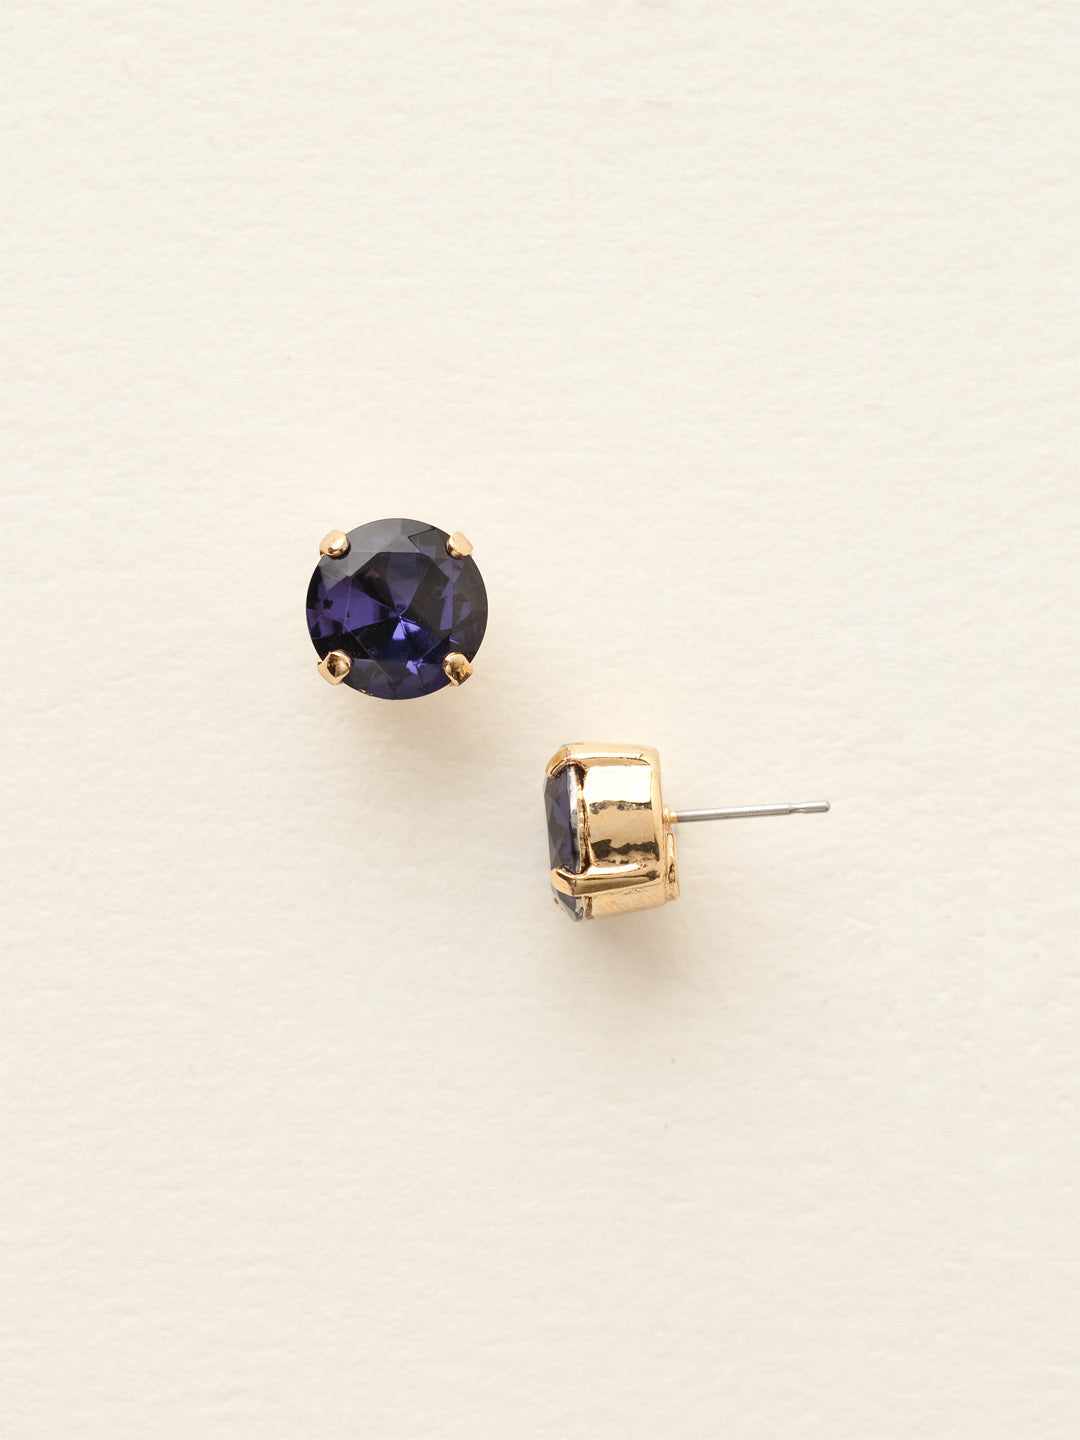 London Stud Earrings - ECM14BGPV - <p>Everyone needs a great pair of studs. Add some classic sparkle to any occasion with these stud earrings. Need help picking a stud? <a href="https://www.sorrelli.com/blogs/sisterhood/round-stud-earrings-101-a-rundown-of-sizes-styles-and-sparkle">Check out our size guide!</a> From Sorrelli's Purple Velvet collection in our Bright Gold-tone finish.</p>